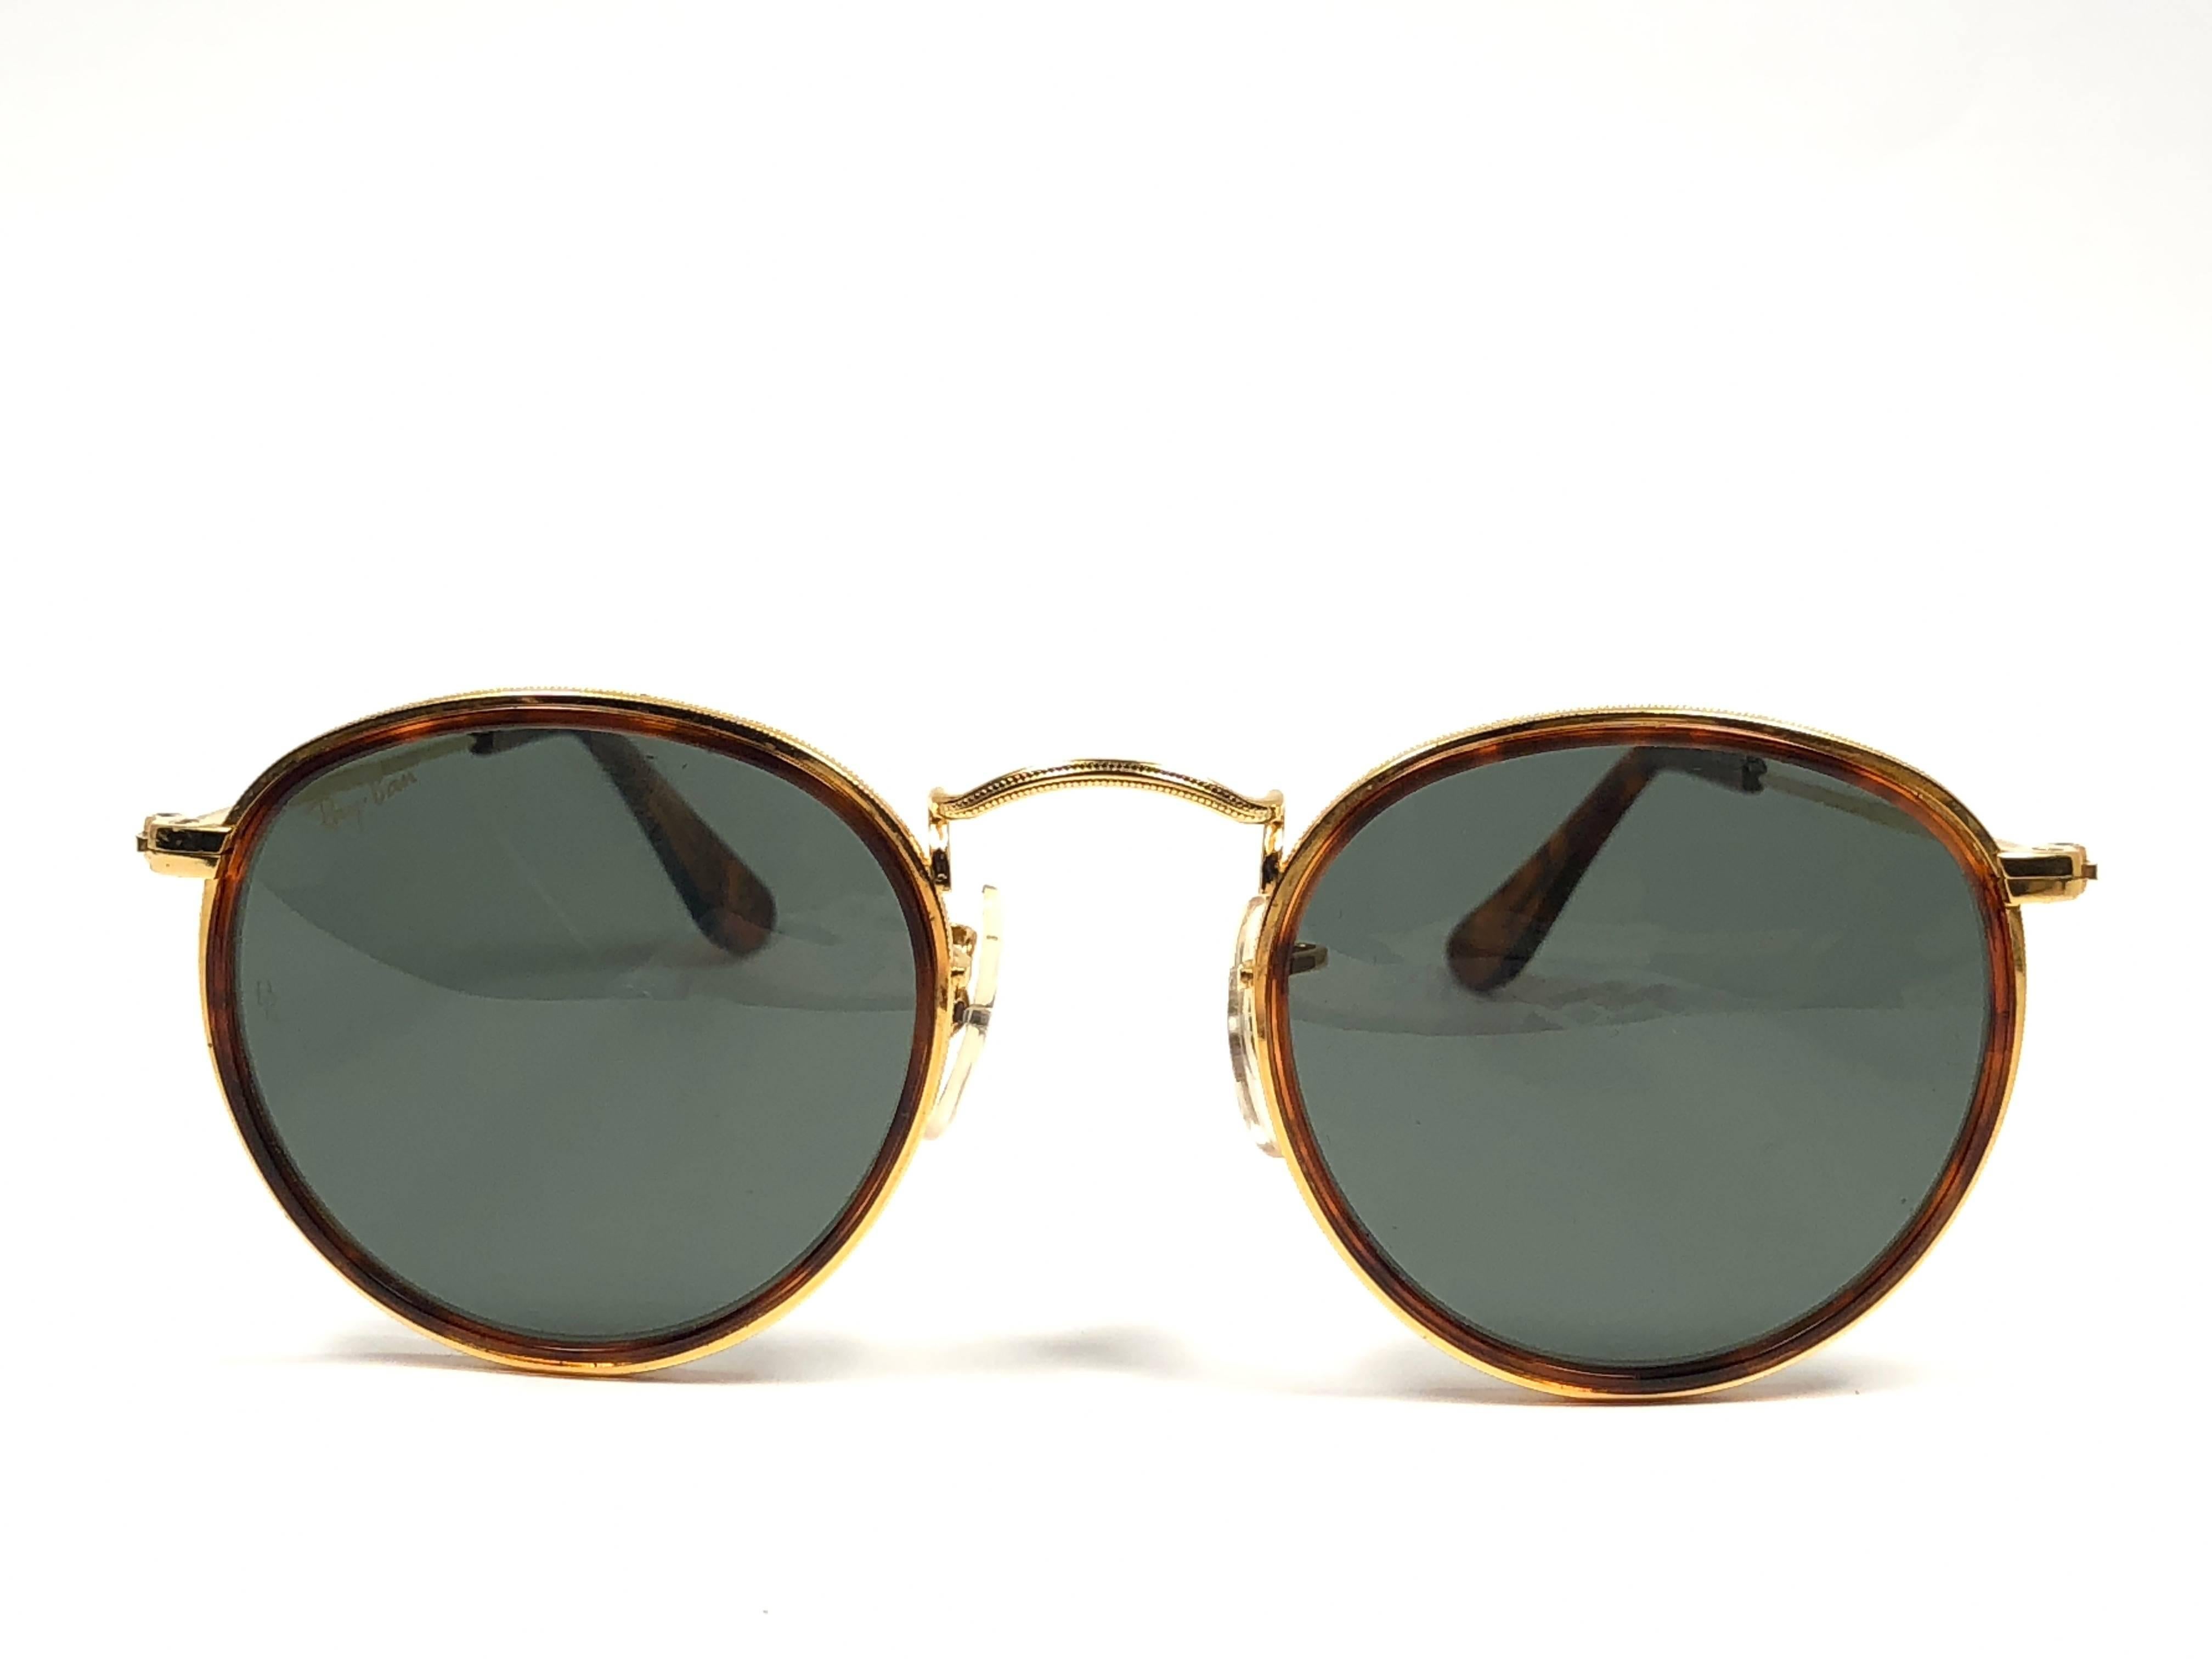 New Vintage Ray Ban classic round frame with tortoise inserts sporting G15 grey lenses.
Comes with its original Ray Ban B&L case with minor sign of wear due to storage.  
